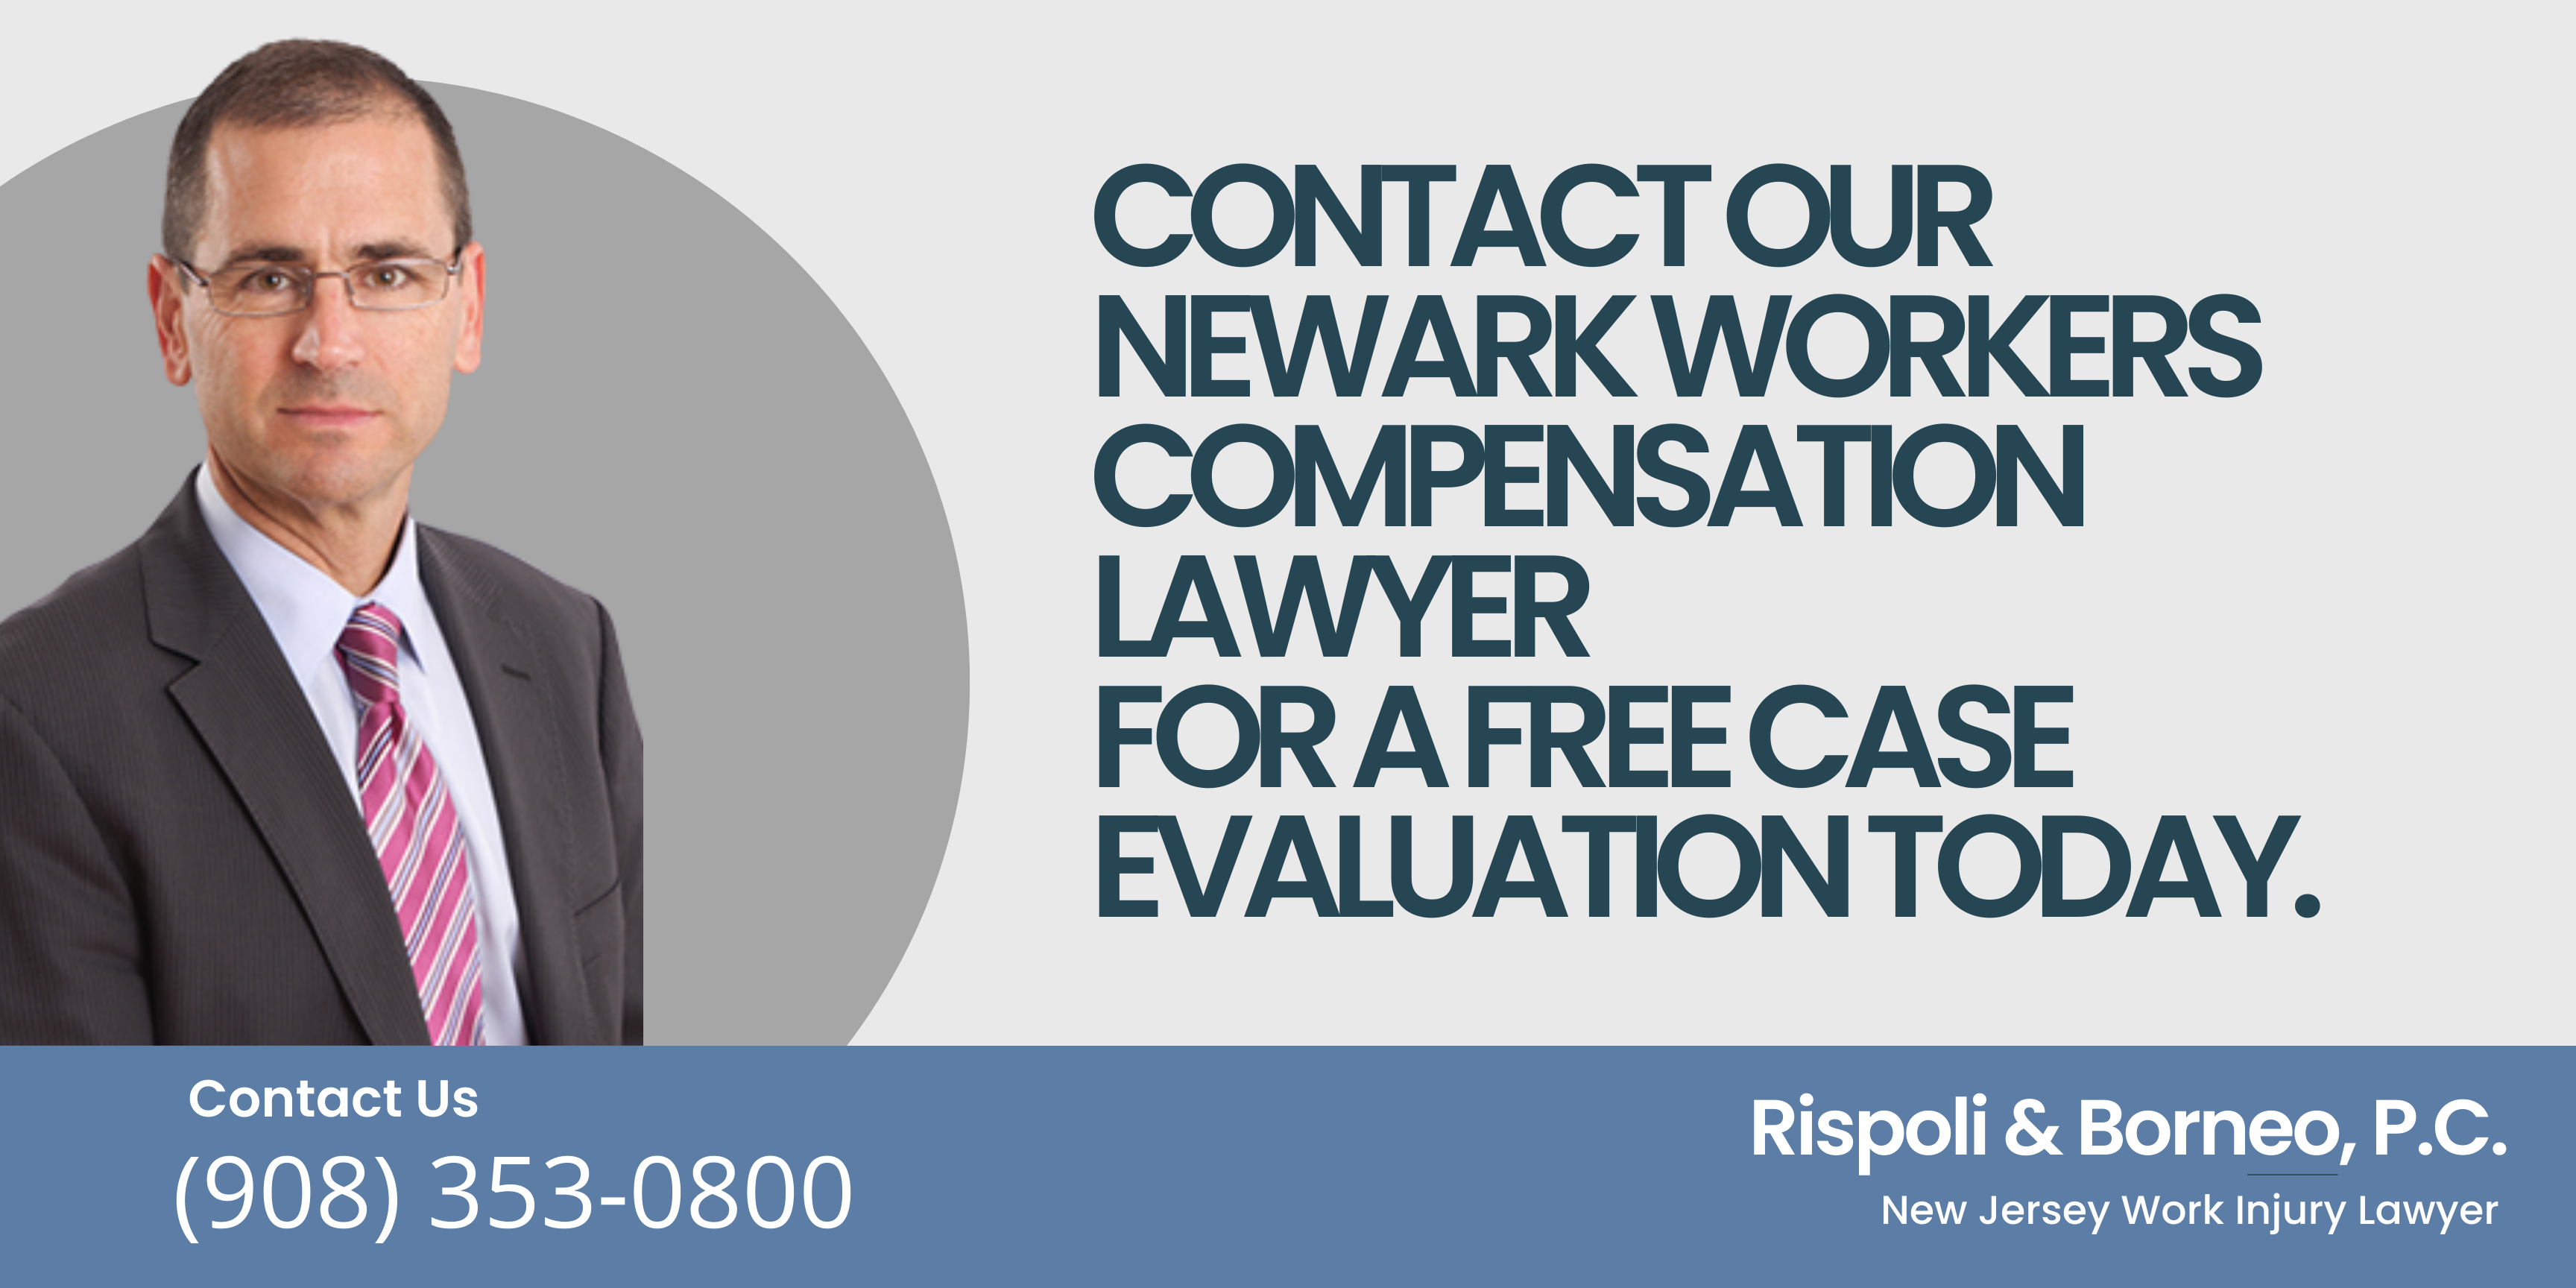 Contact our Newark Workers Compensation Lawyer